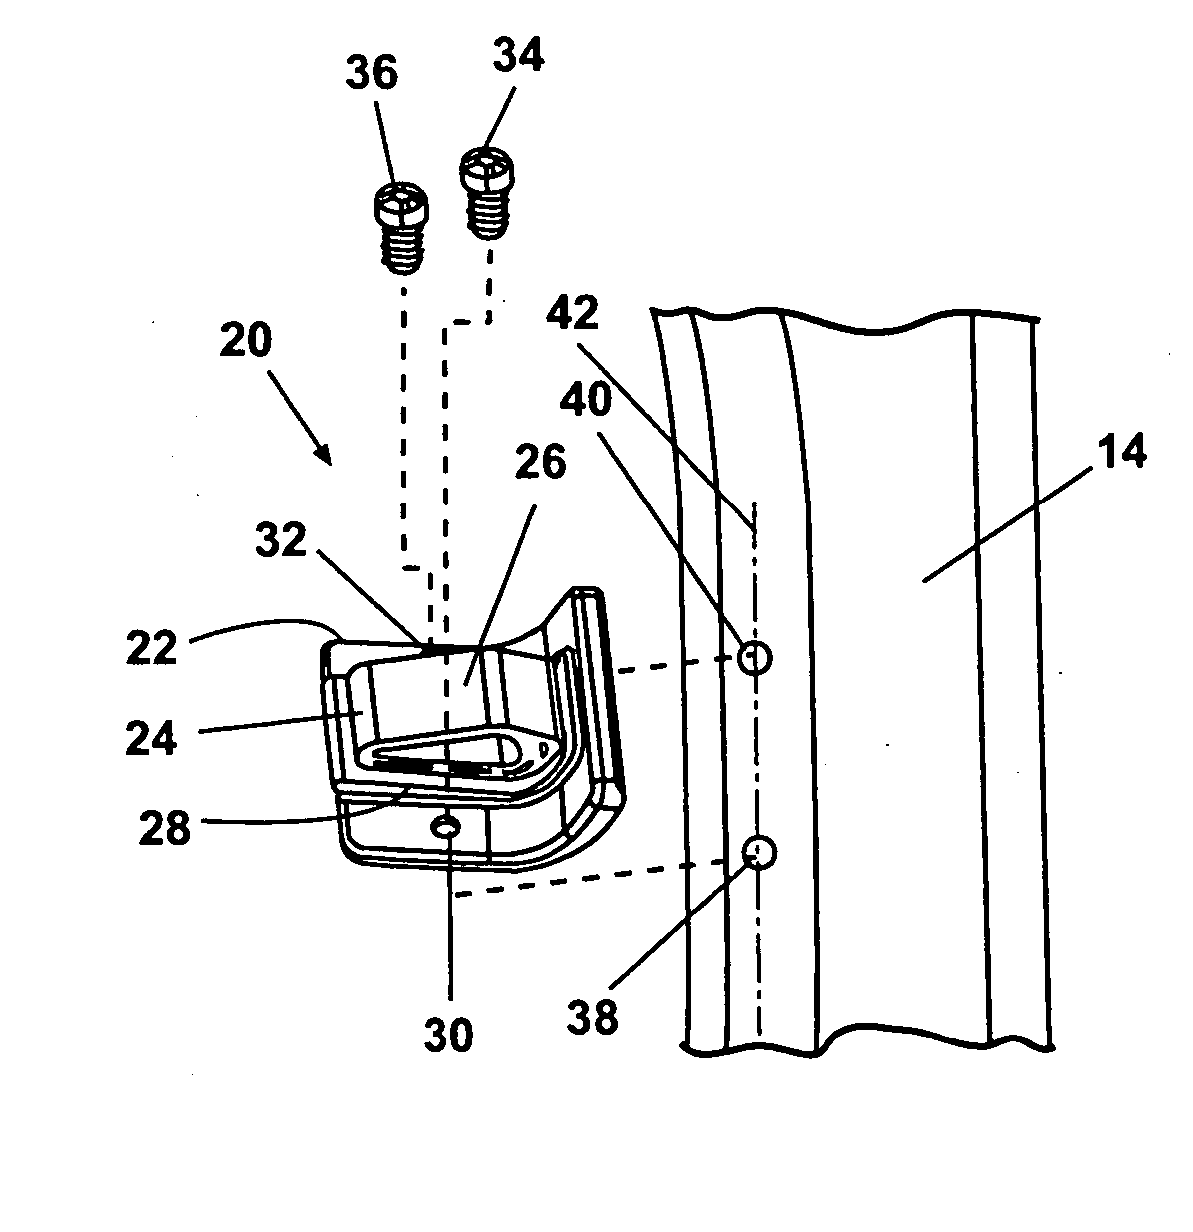 Wedge assembly